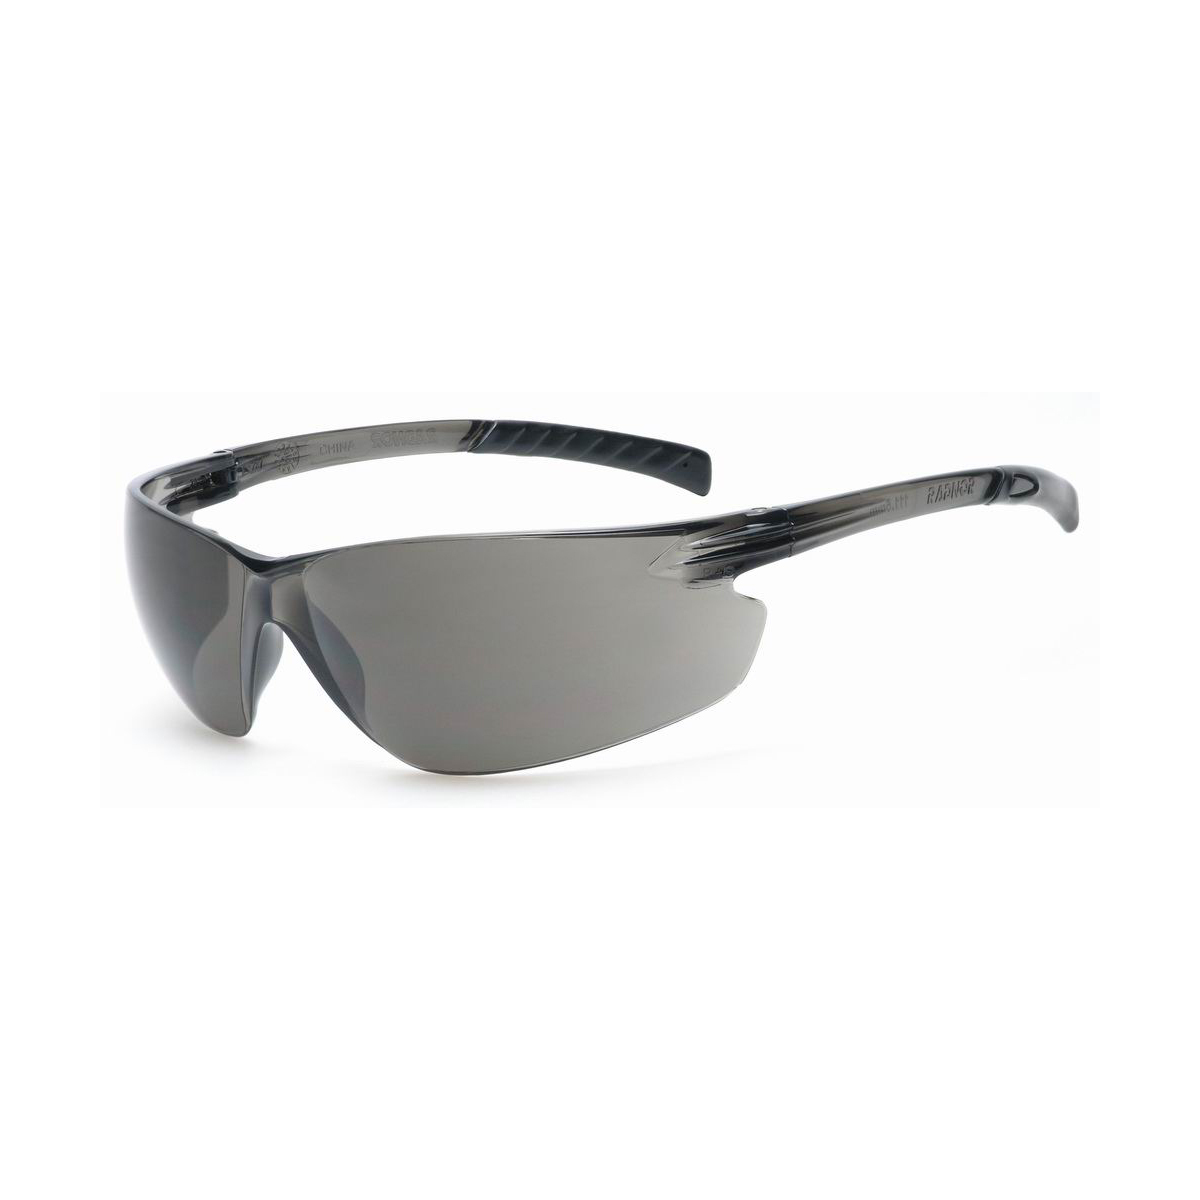 RADNOR® Classic Plus Gray Frameless Safety Glasses With Gray Polycarbonate Hard Coat Lens (Availability restrictions apply.)